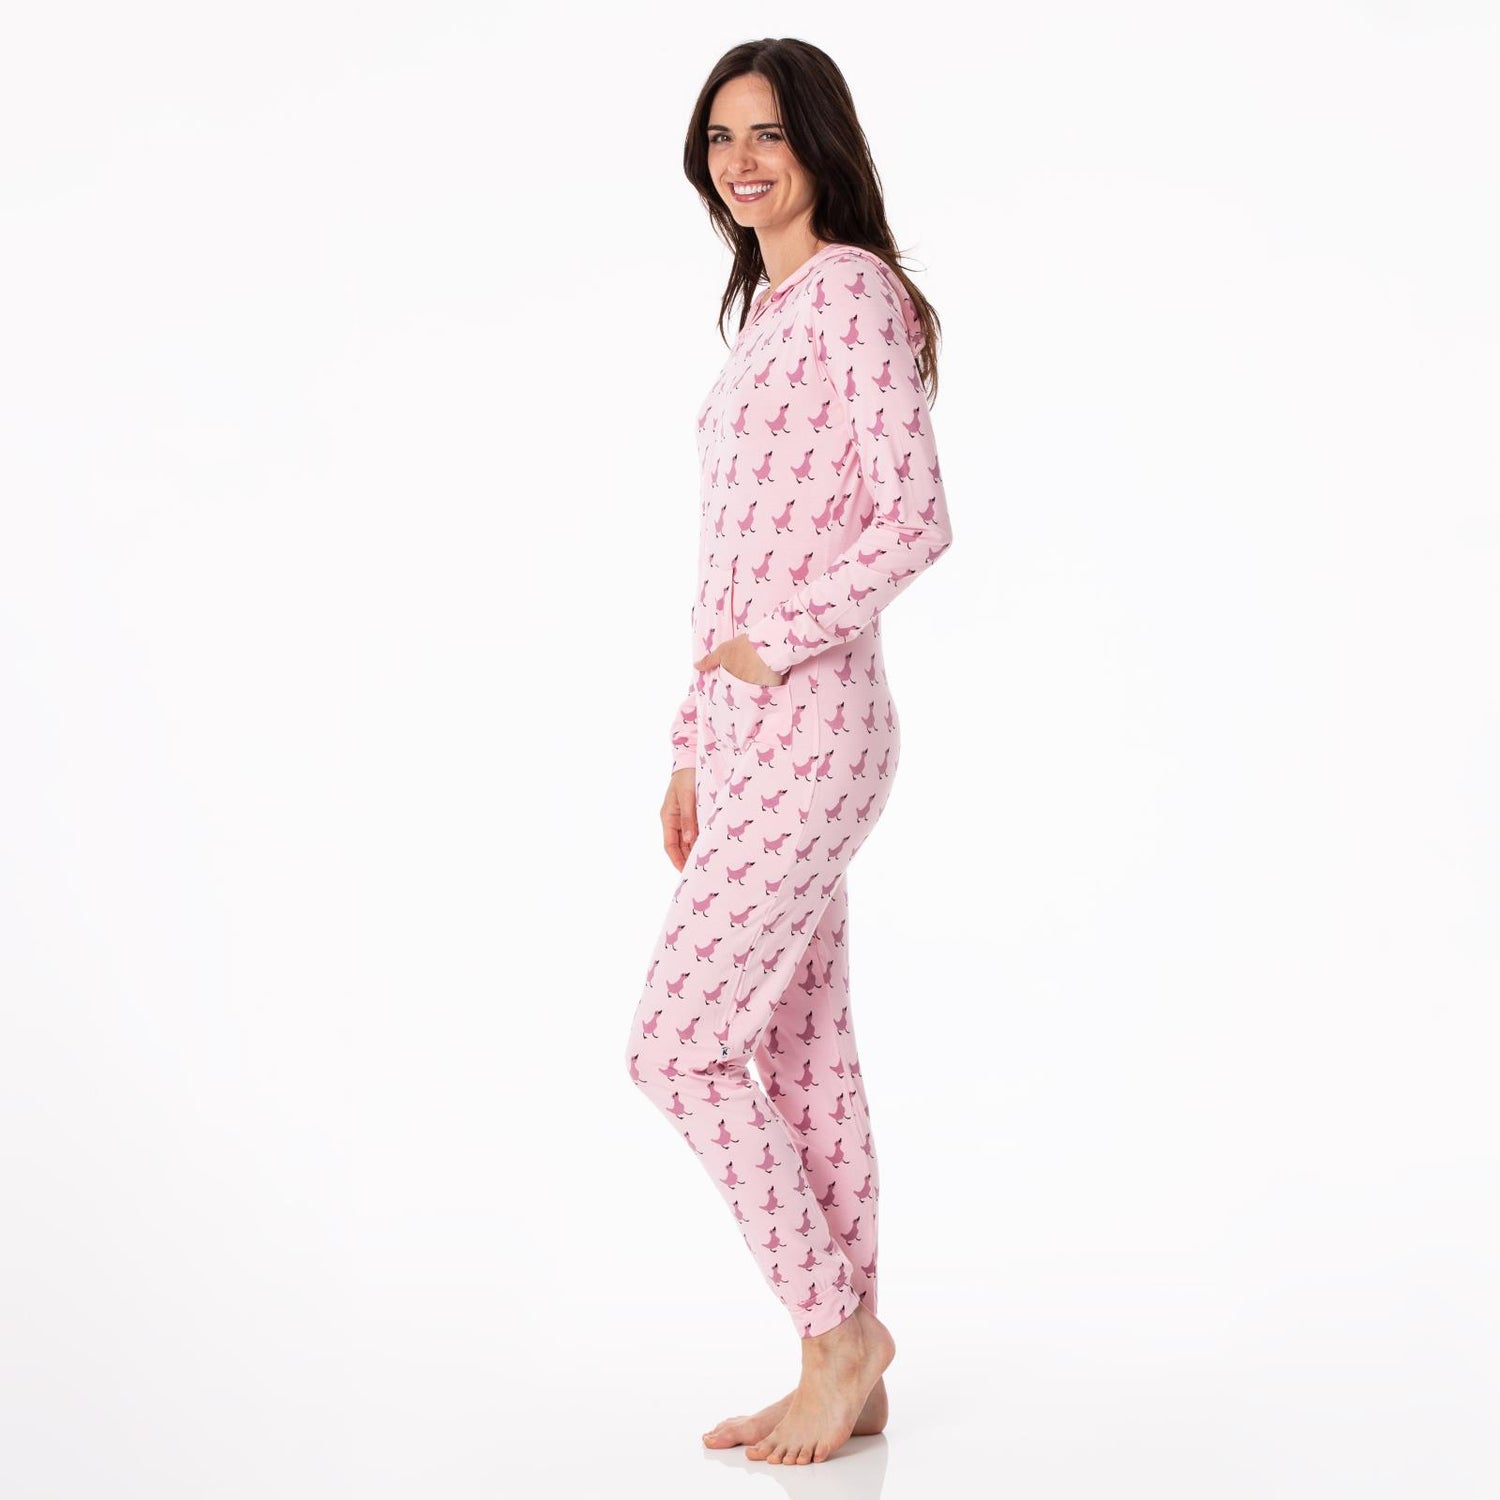 Women's Print Long Sleeve Jumpsuit with Hood in Cake Pop Ugly Duckling